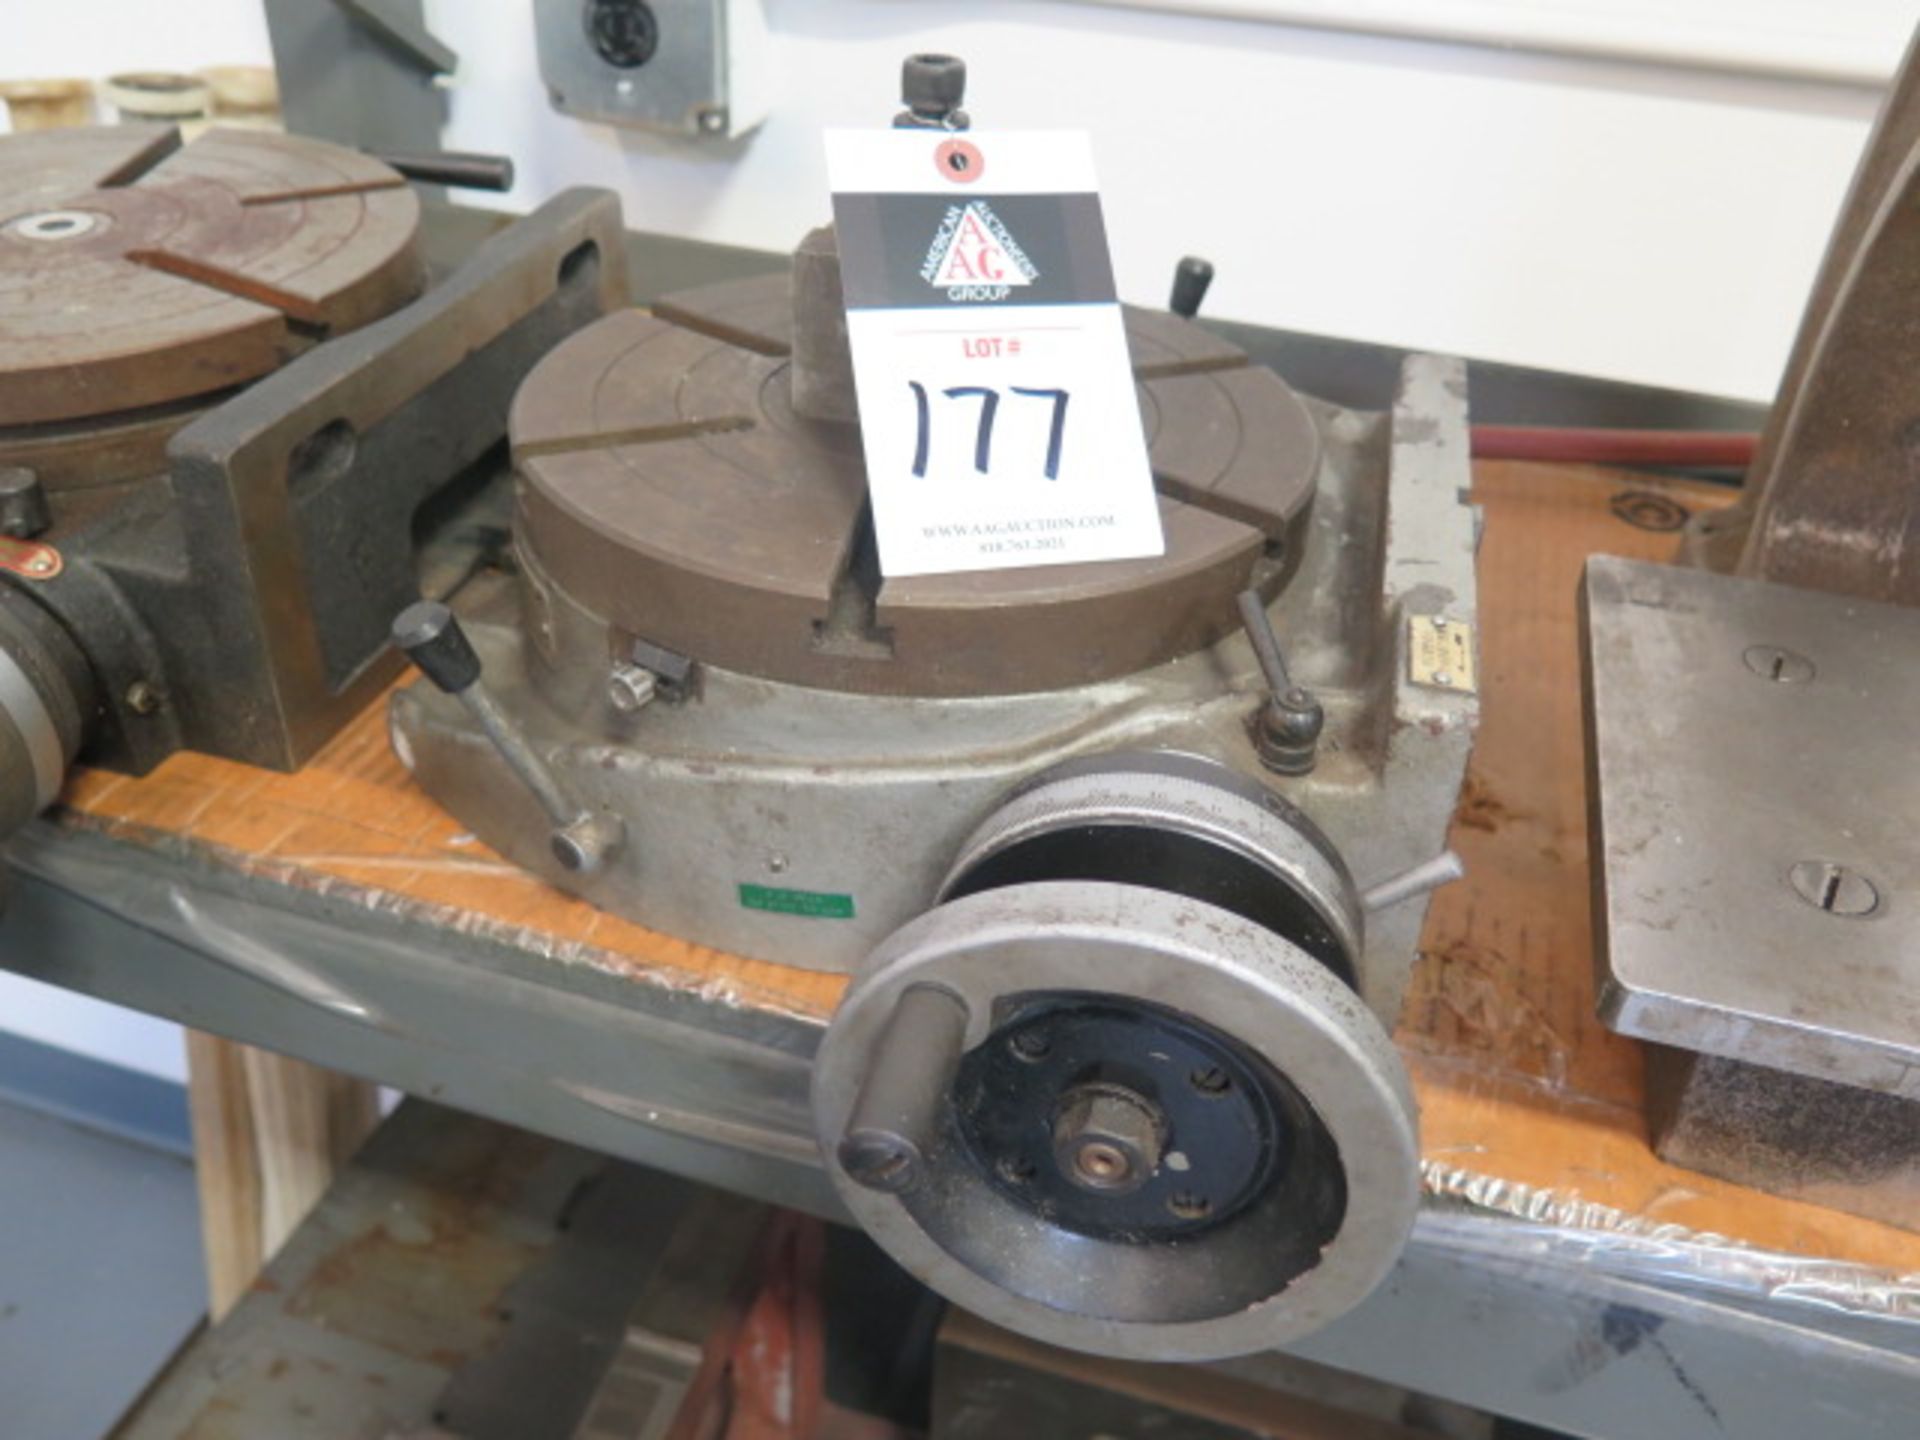 10” Rotary Table (SOLD AS-IS - NO WARRANTY)